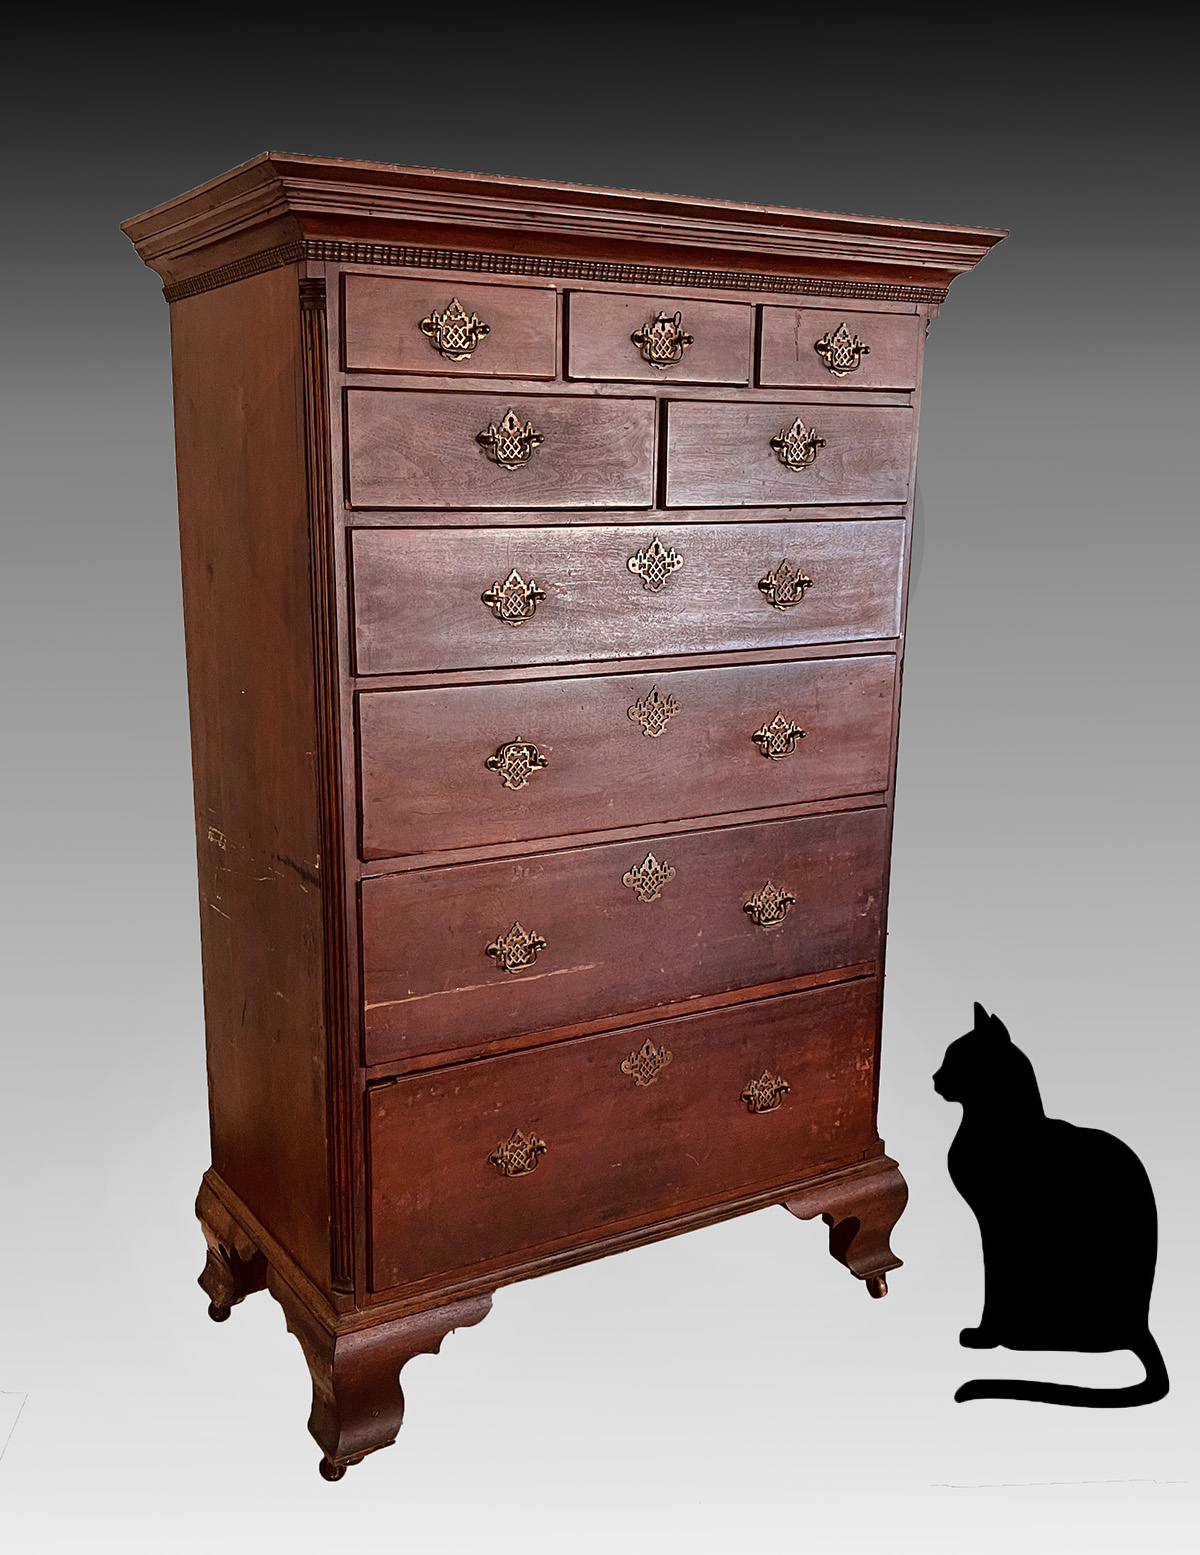 EARLY MAHOGANY 9 DRAWER CHEST: